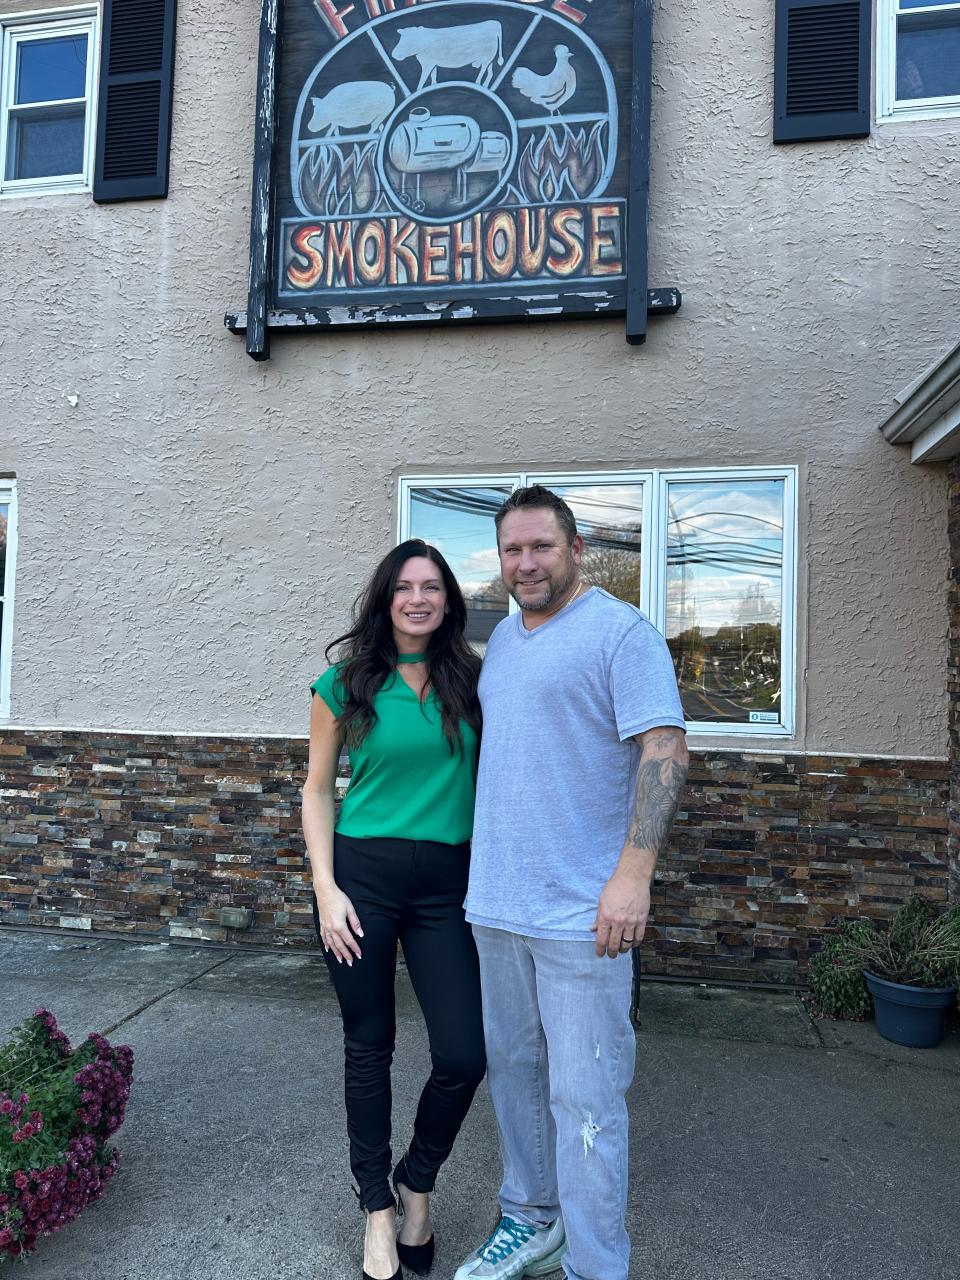 Fireside Inn starts a new chapter under its new owners, Jenn and Michael Capobianco, who purchased the longstanding Feasterville bar from the Sentner family.